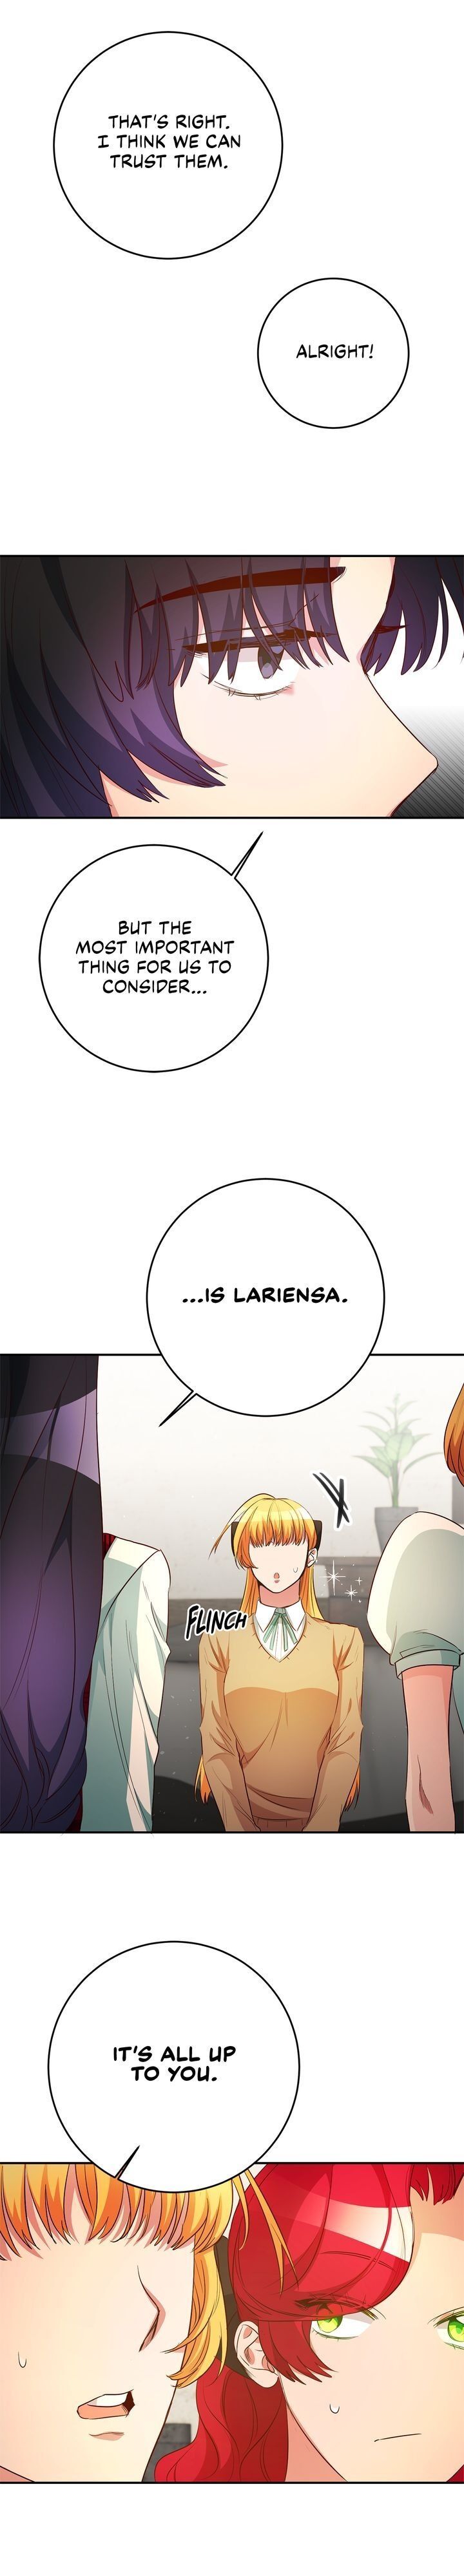 Marilyn Likes Lariensa Too Much! Chapter 30 page 21